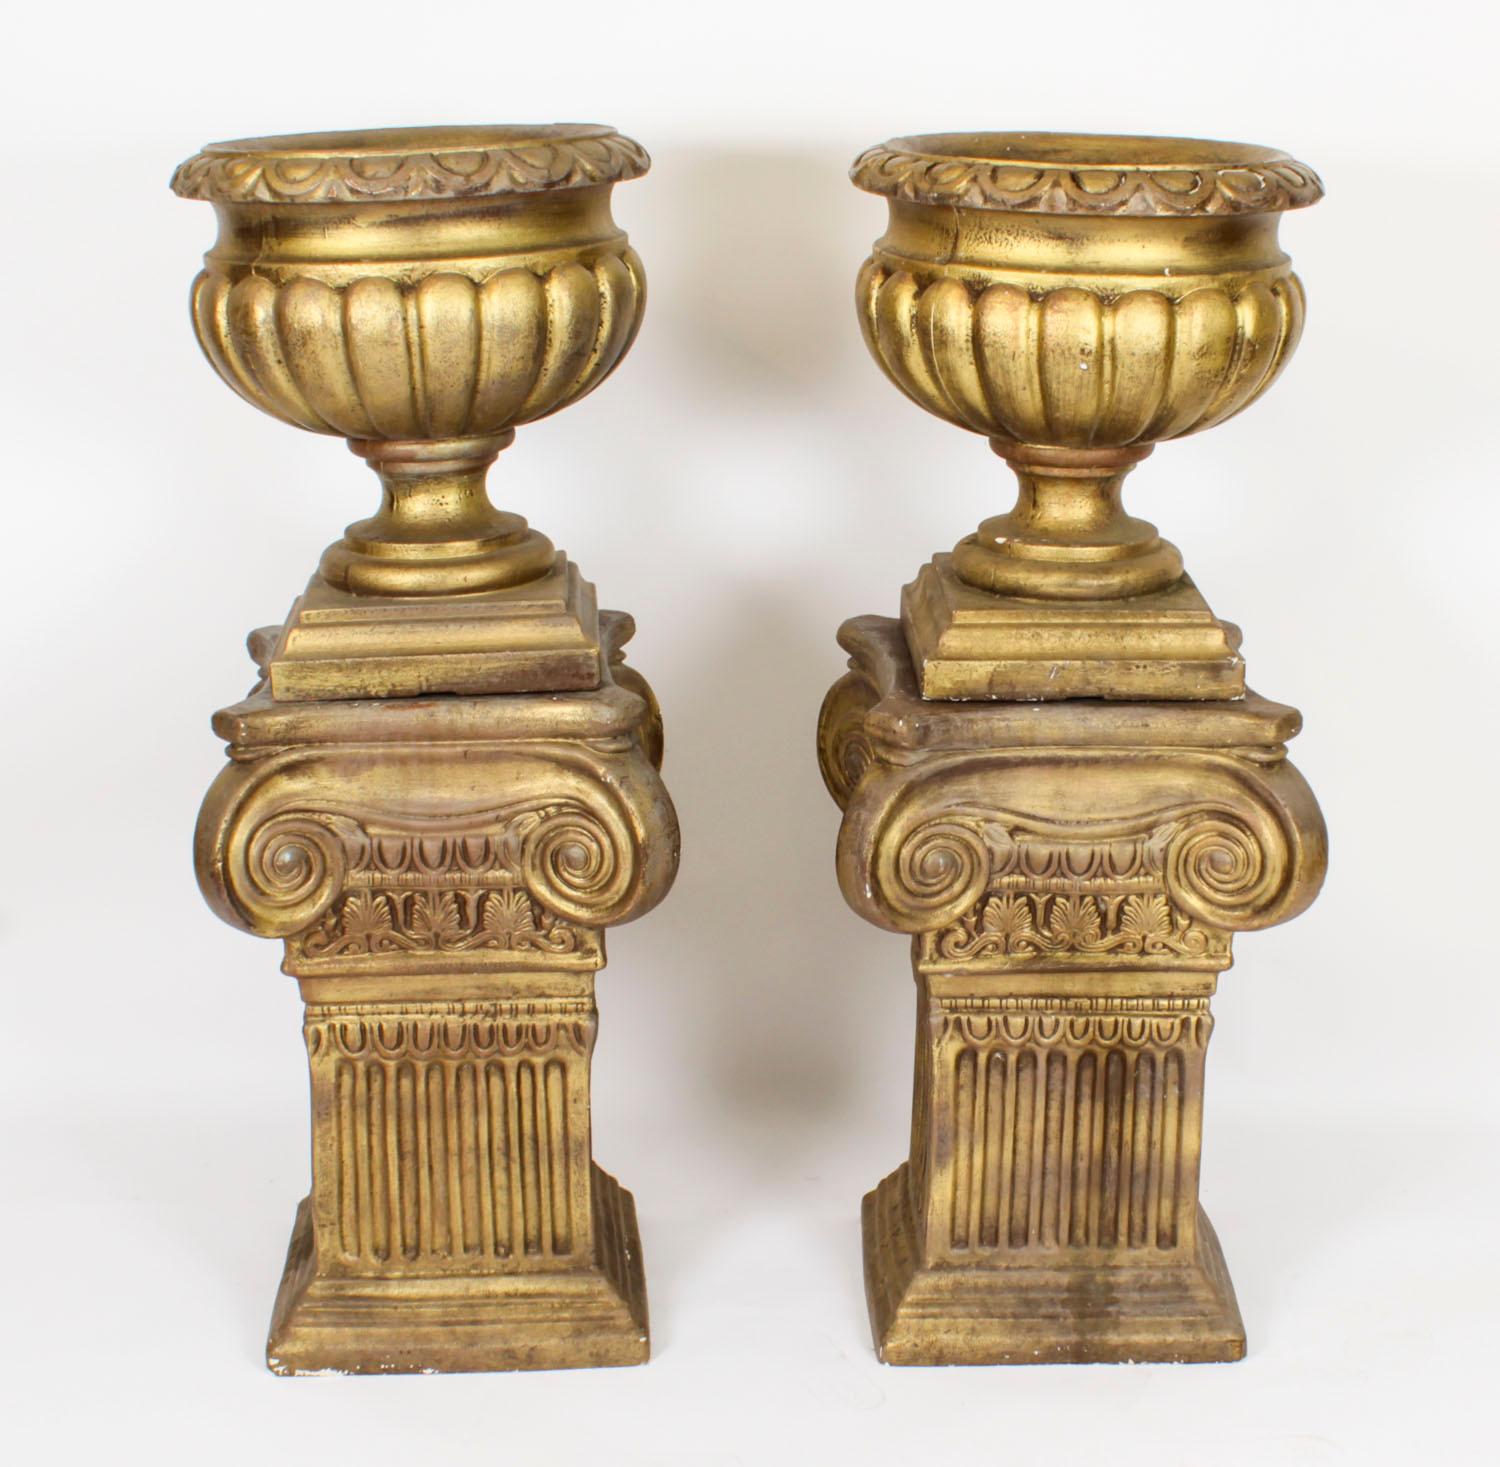 A decorative vintage pair of late 20th century Hollywood Regency classical garden urns / planters of fiberglass construction. Each having an urn top supported by Roman style column bases. 

Condition:
In good condition. As vintage items, the urns